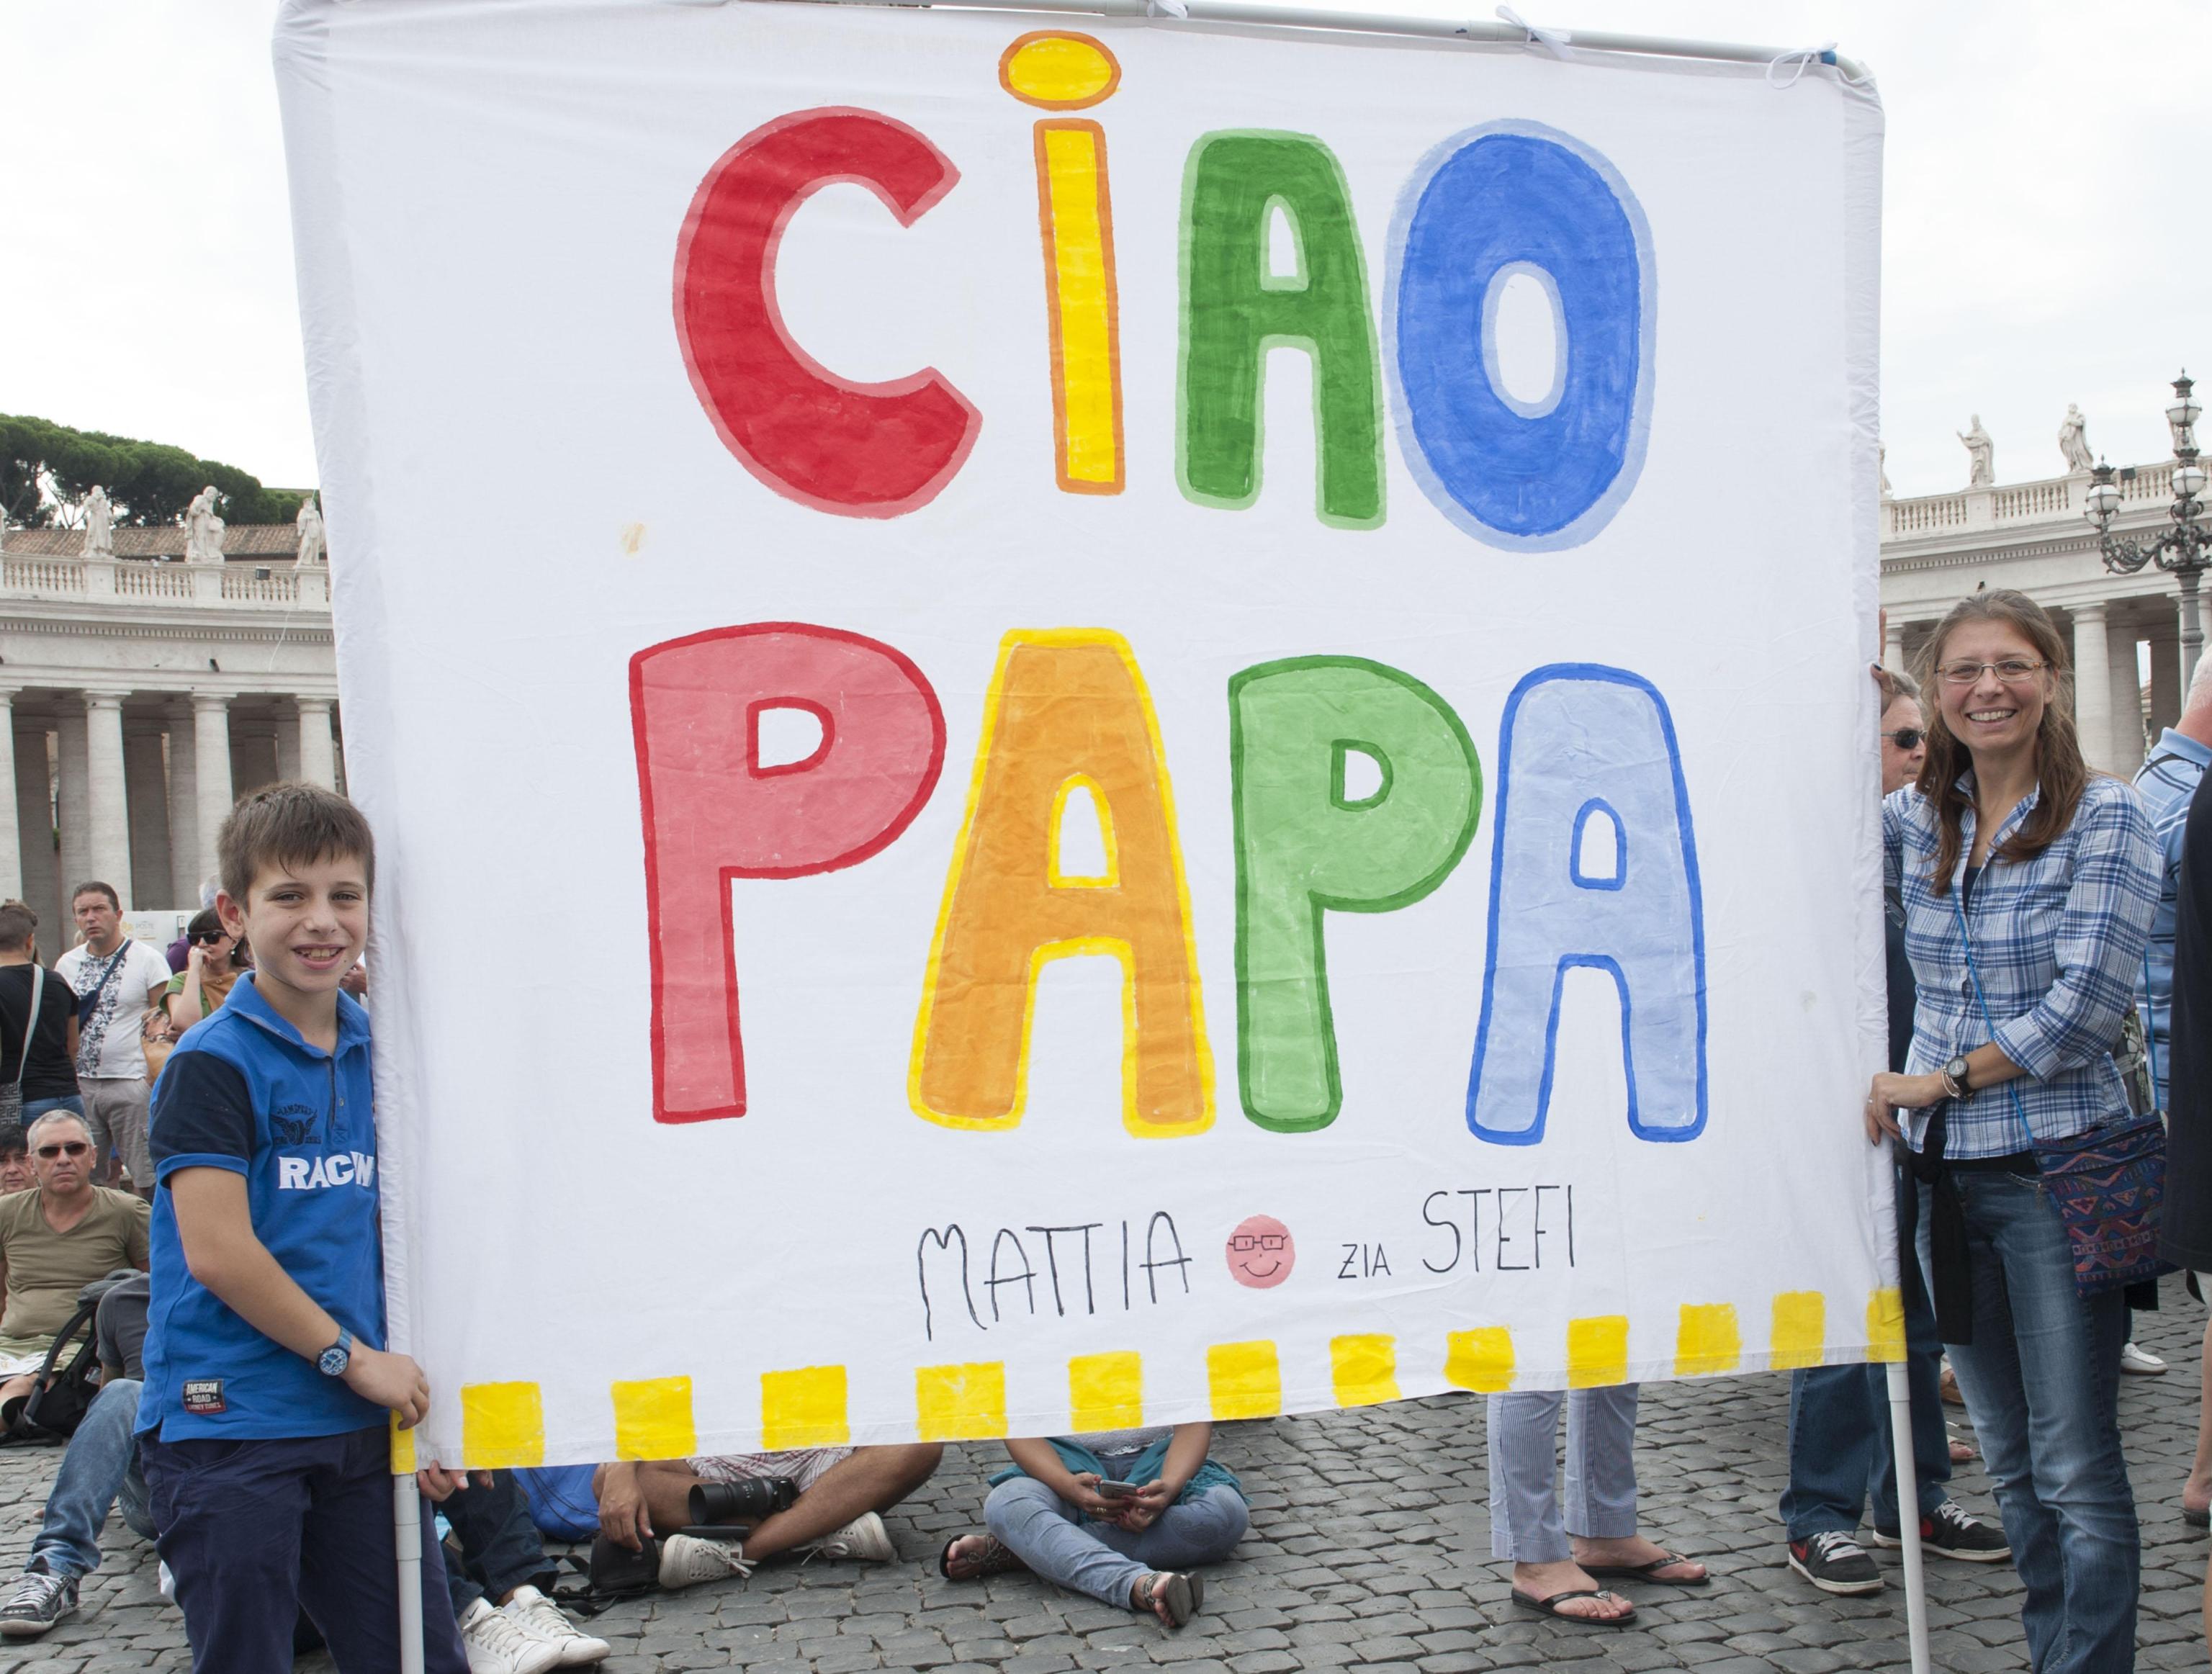 Faithful at St. Peter's Square during Pope Francis' Angelus on Sunday 13th of September 2015